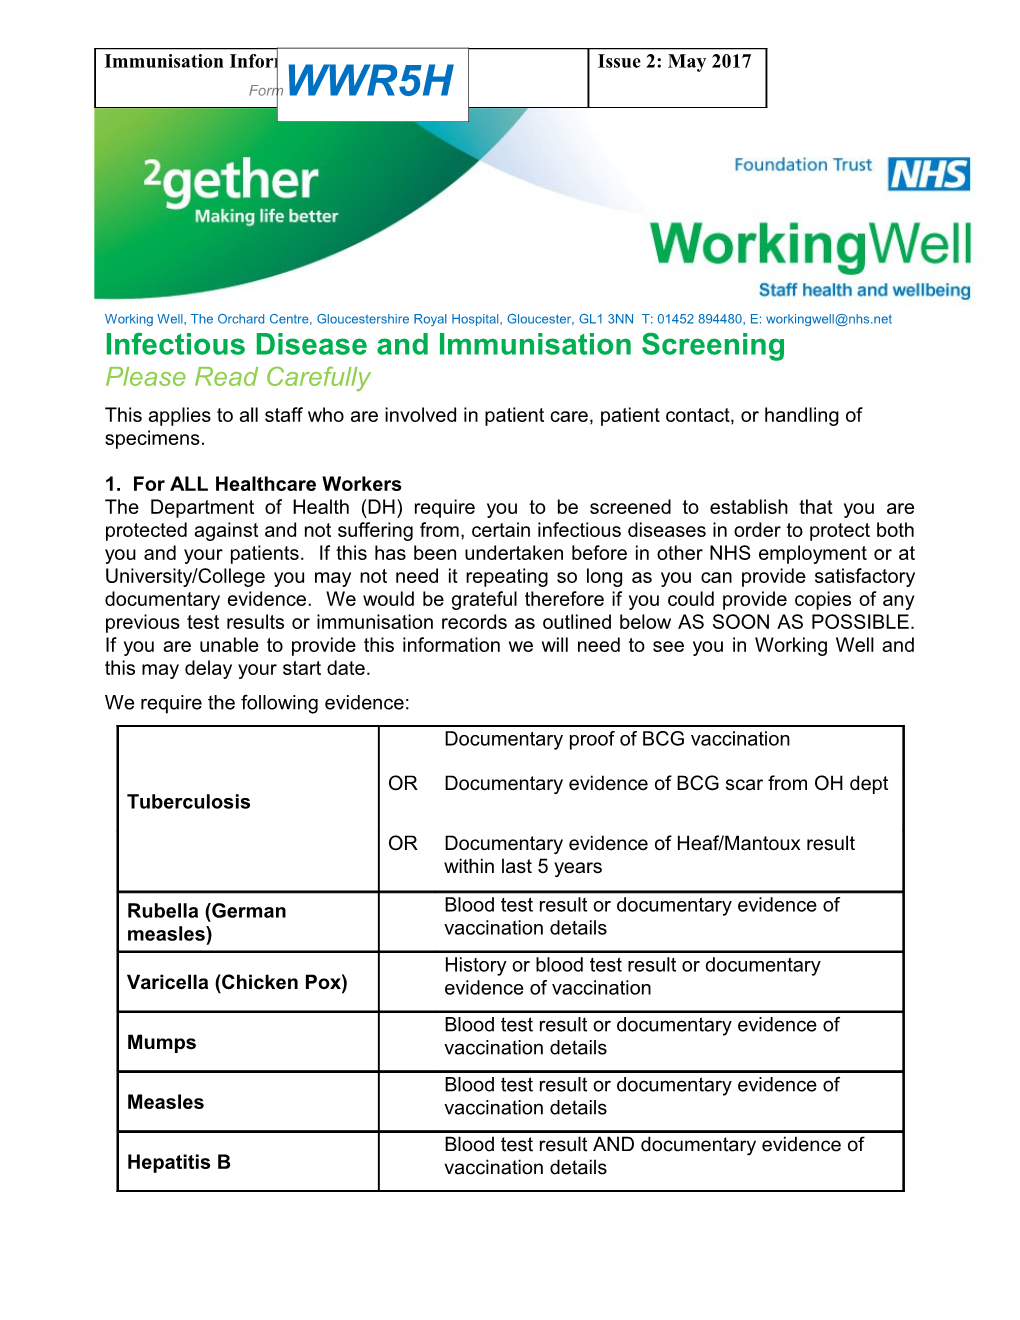 Infectious Disease and Immunisation Screening